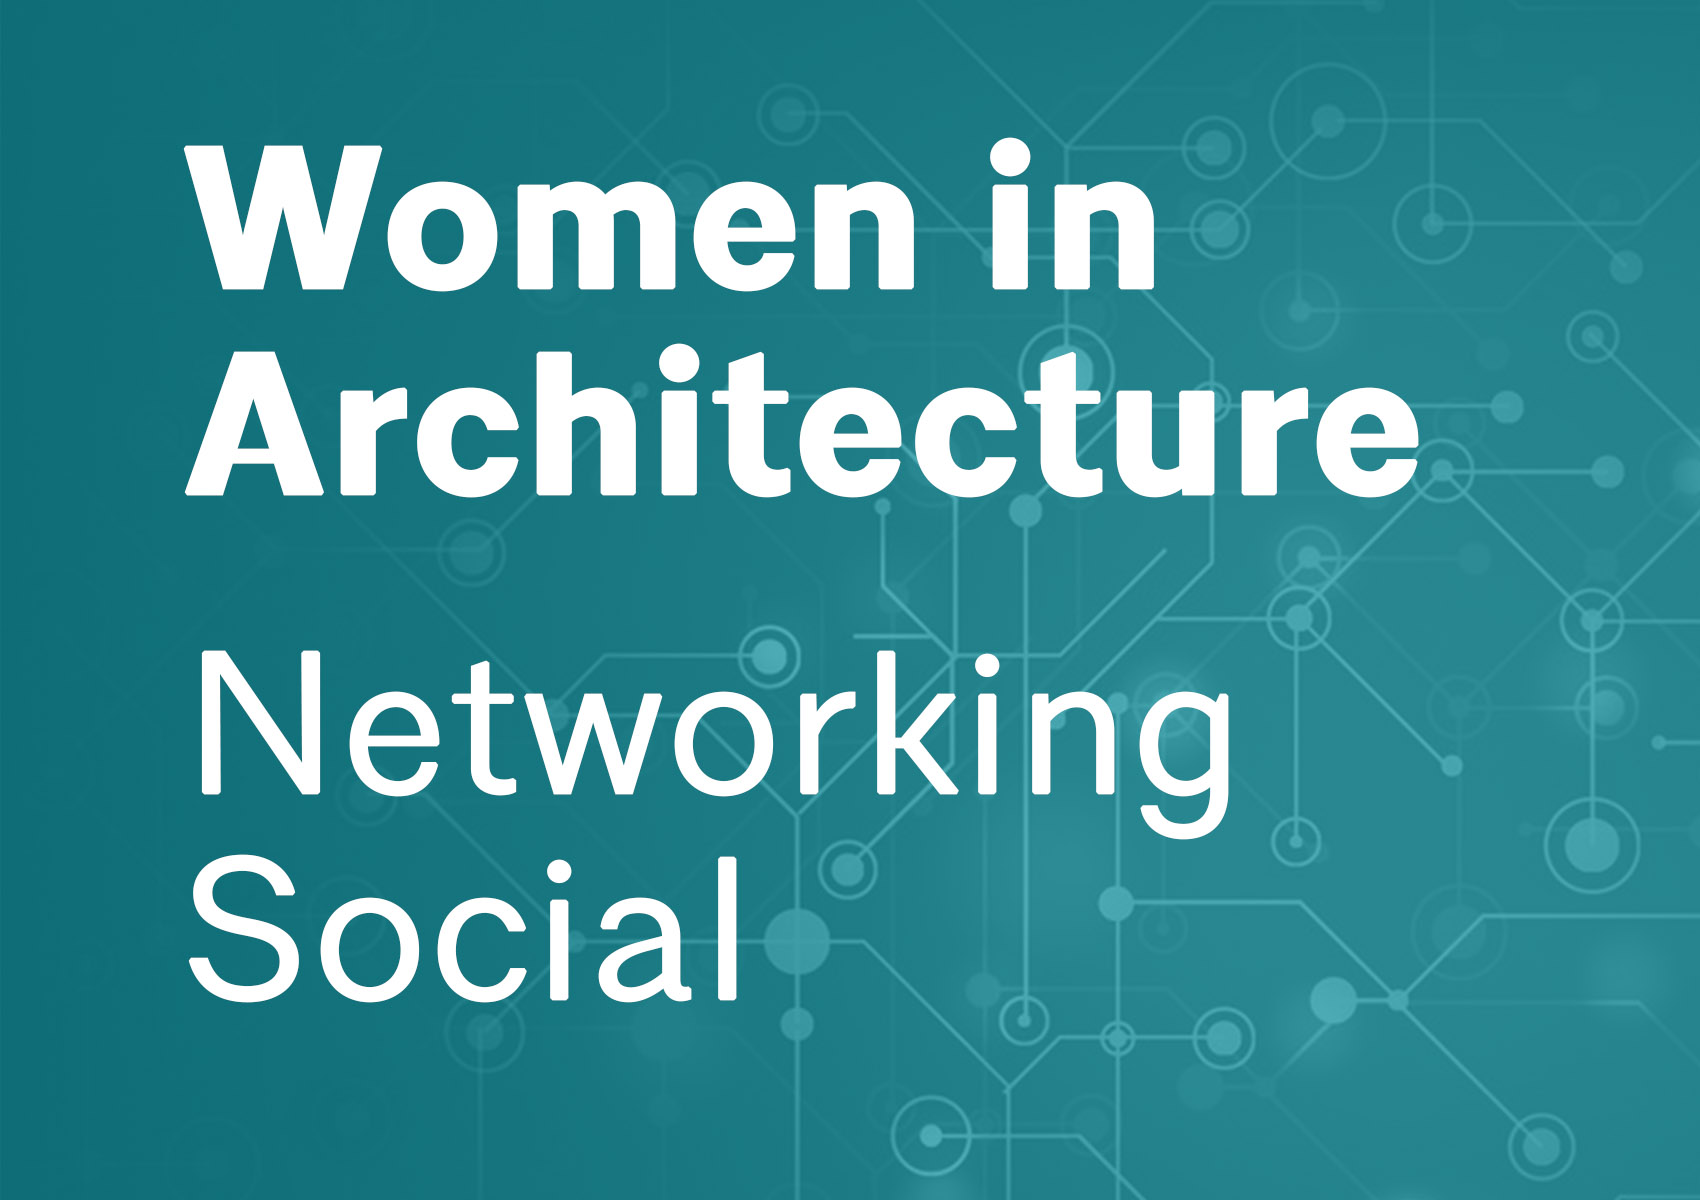 Women in Architecture Networking Social